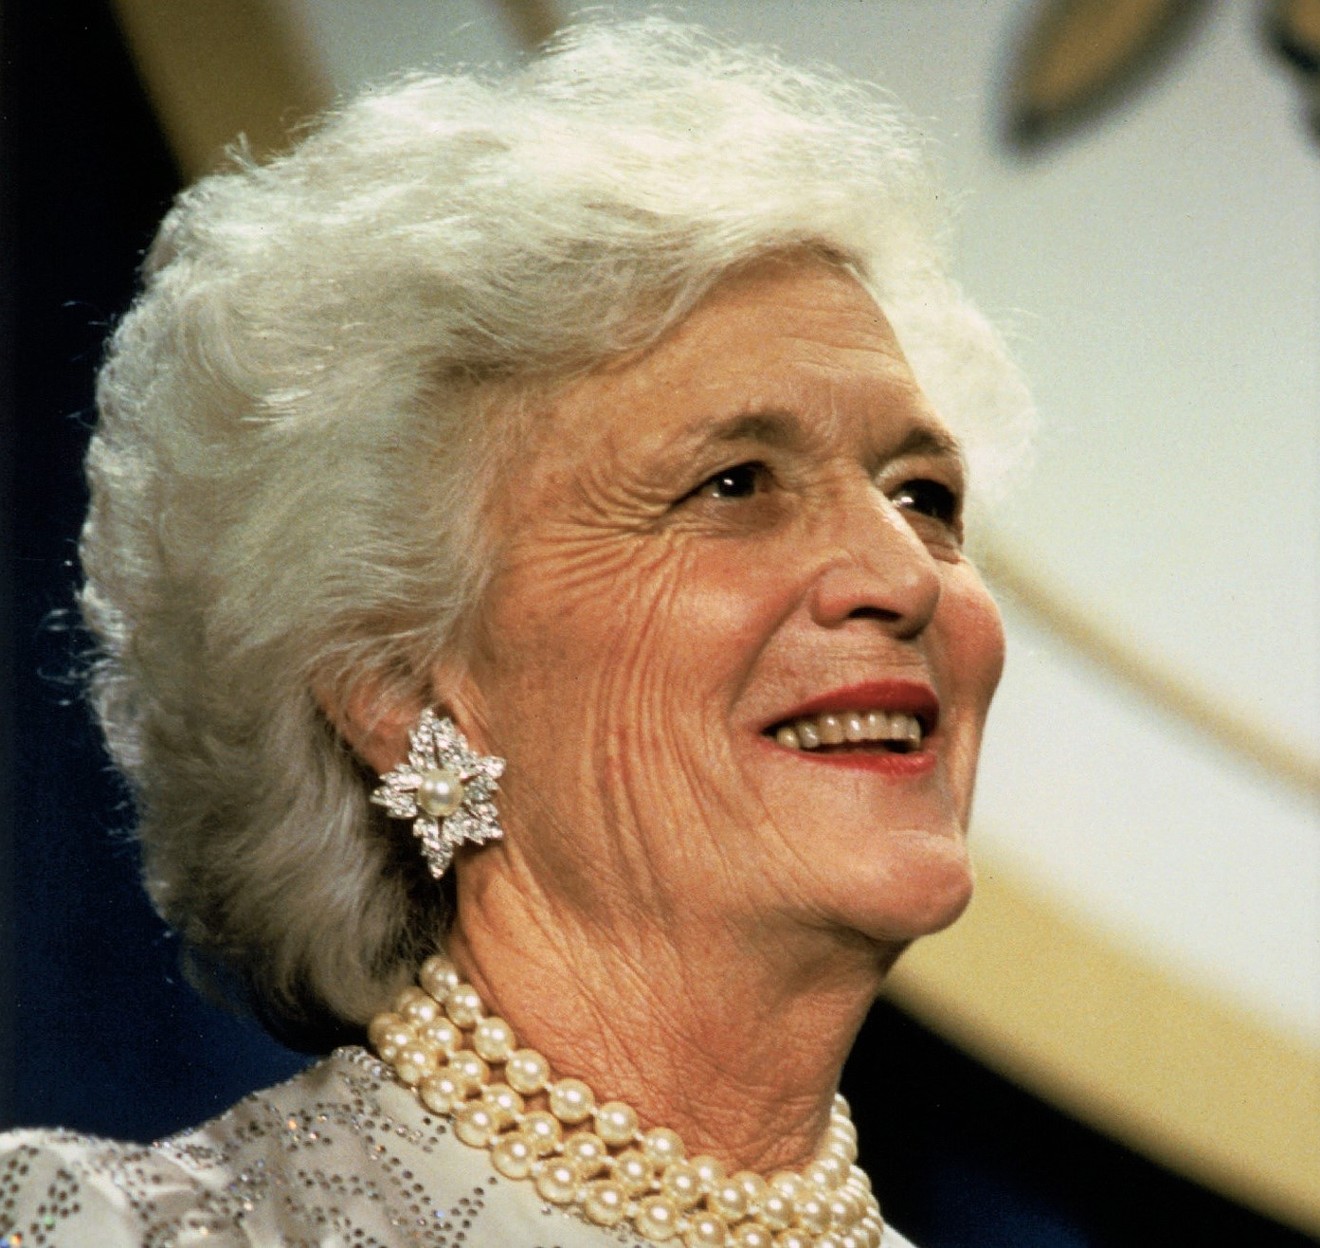 Barbara Bush could make an entire arena of adrenaline-crazed savages sit down and be quiet just by lifting her hands.